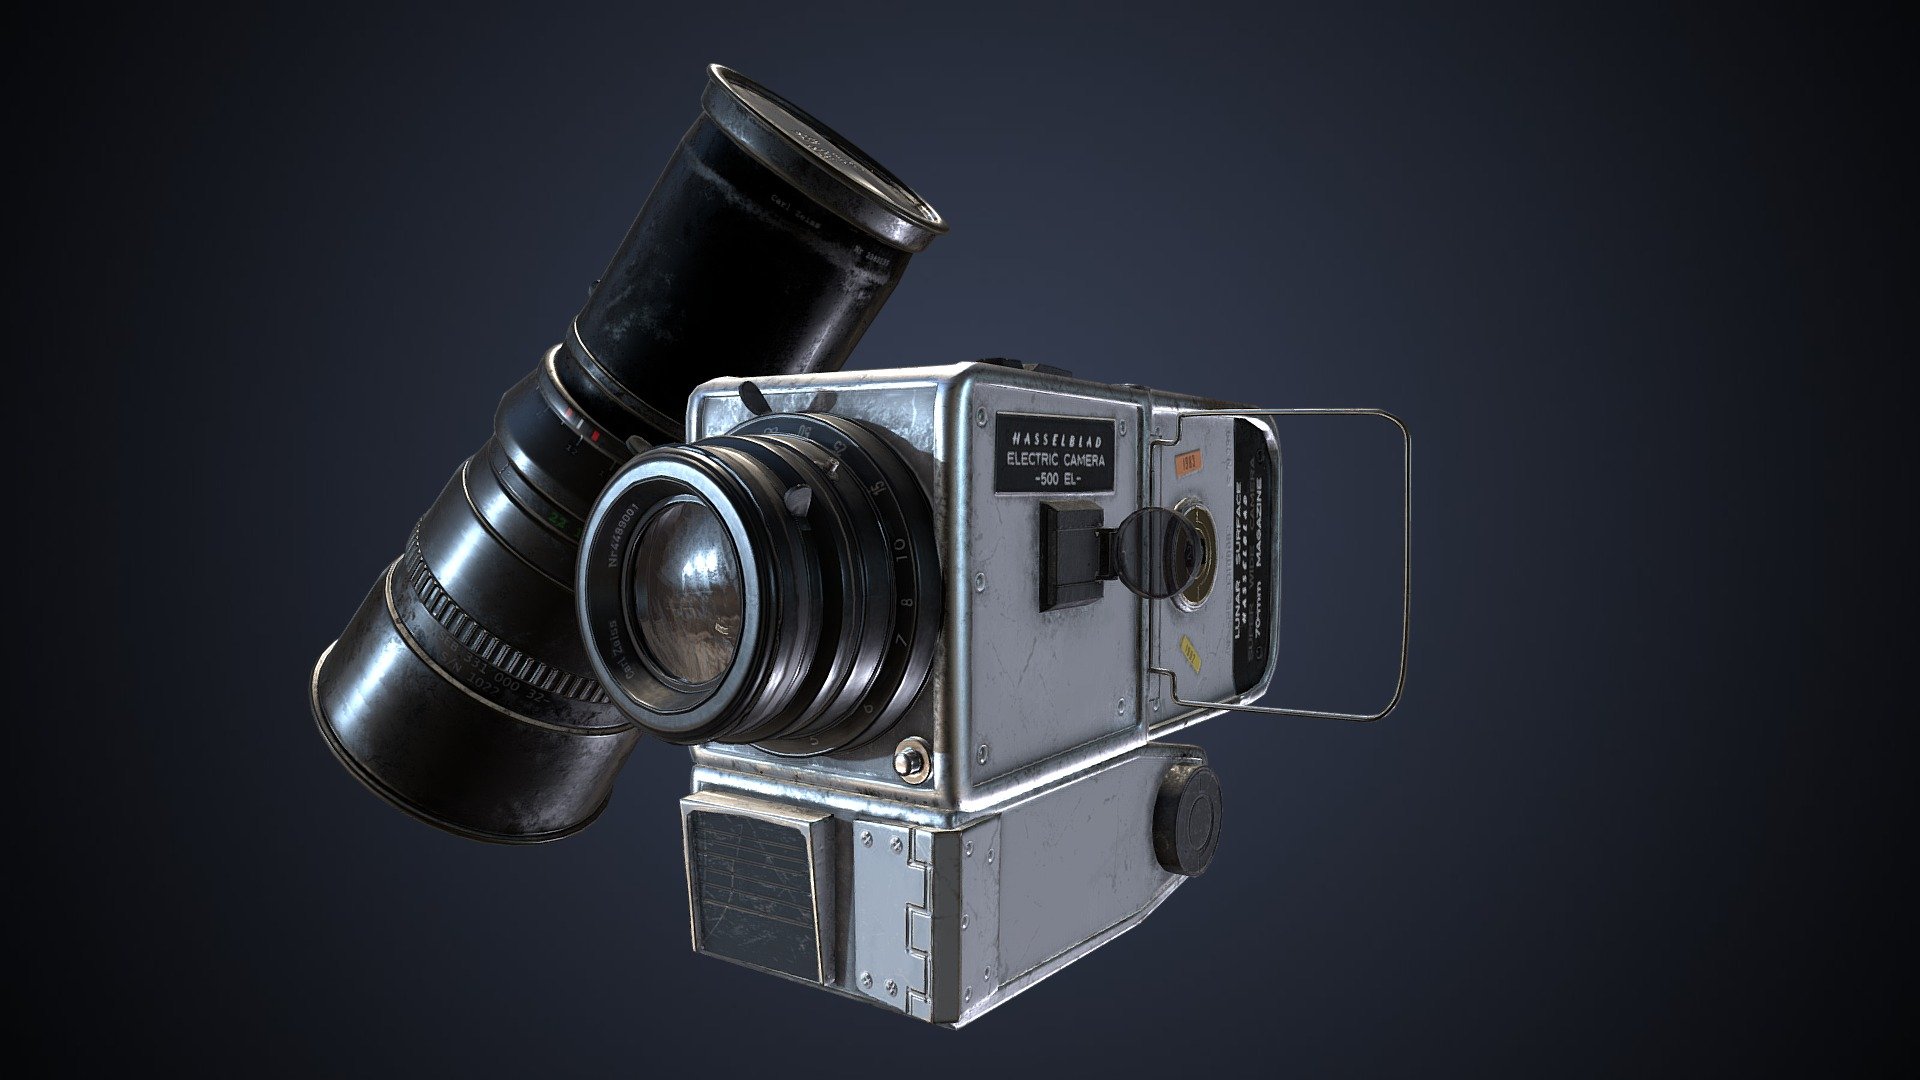 The camera that went to the moon with the Apollo 11 mission! 
Final exam for the course Game Asset Pipeline. Model made in 3DsMax and zBrush, textured in Substance Painter 3d model